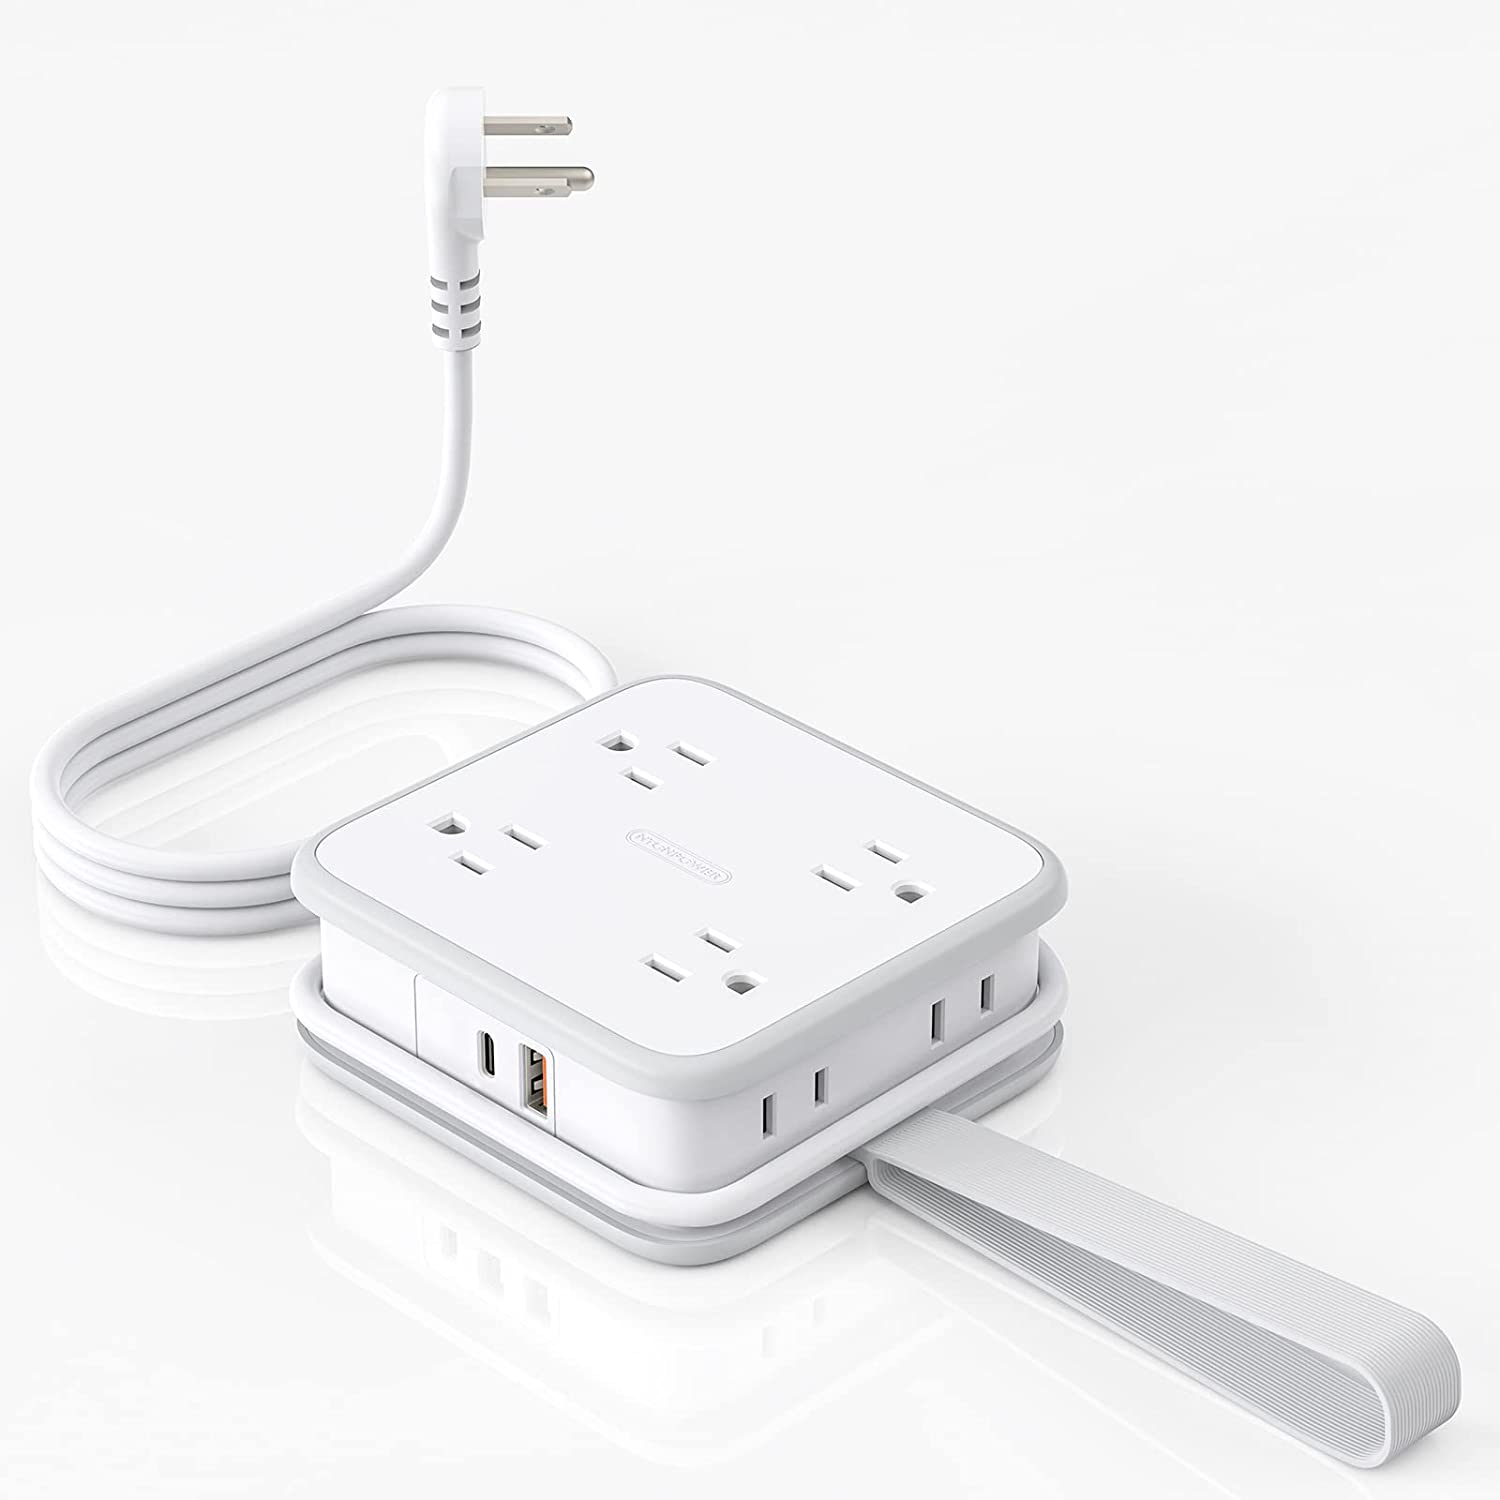 Ntonpower Power Cube 8 Widely Outlets and 3 Ports Power Strip